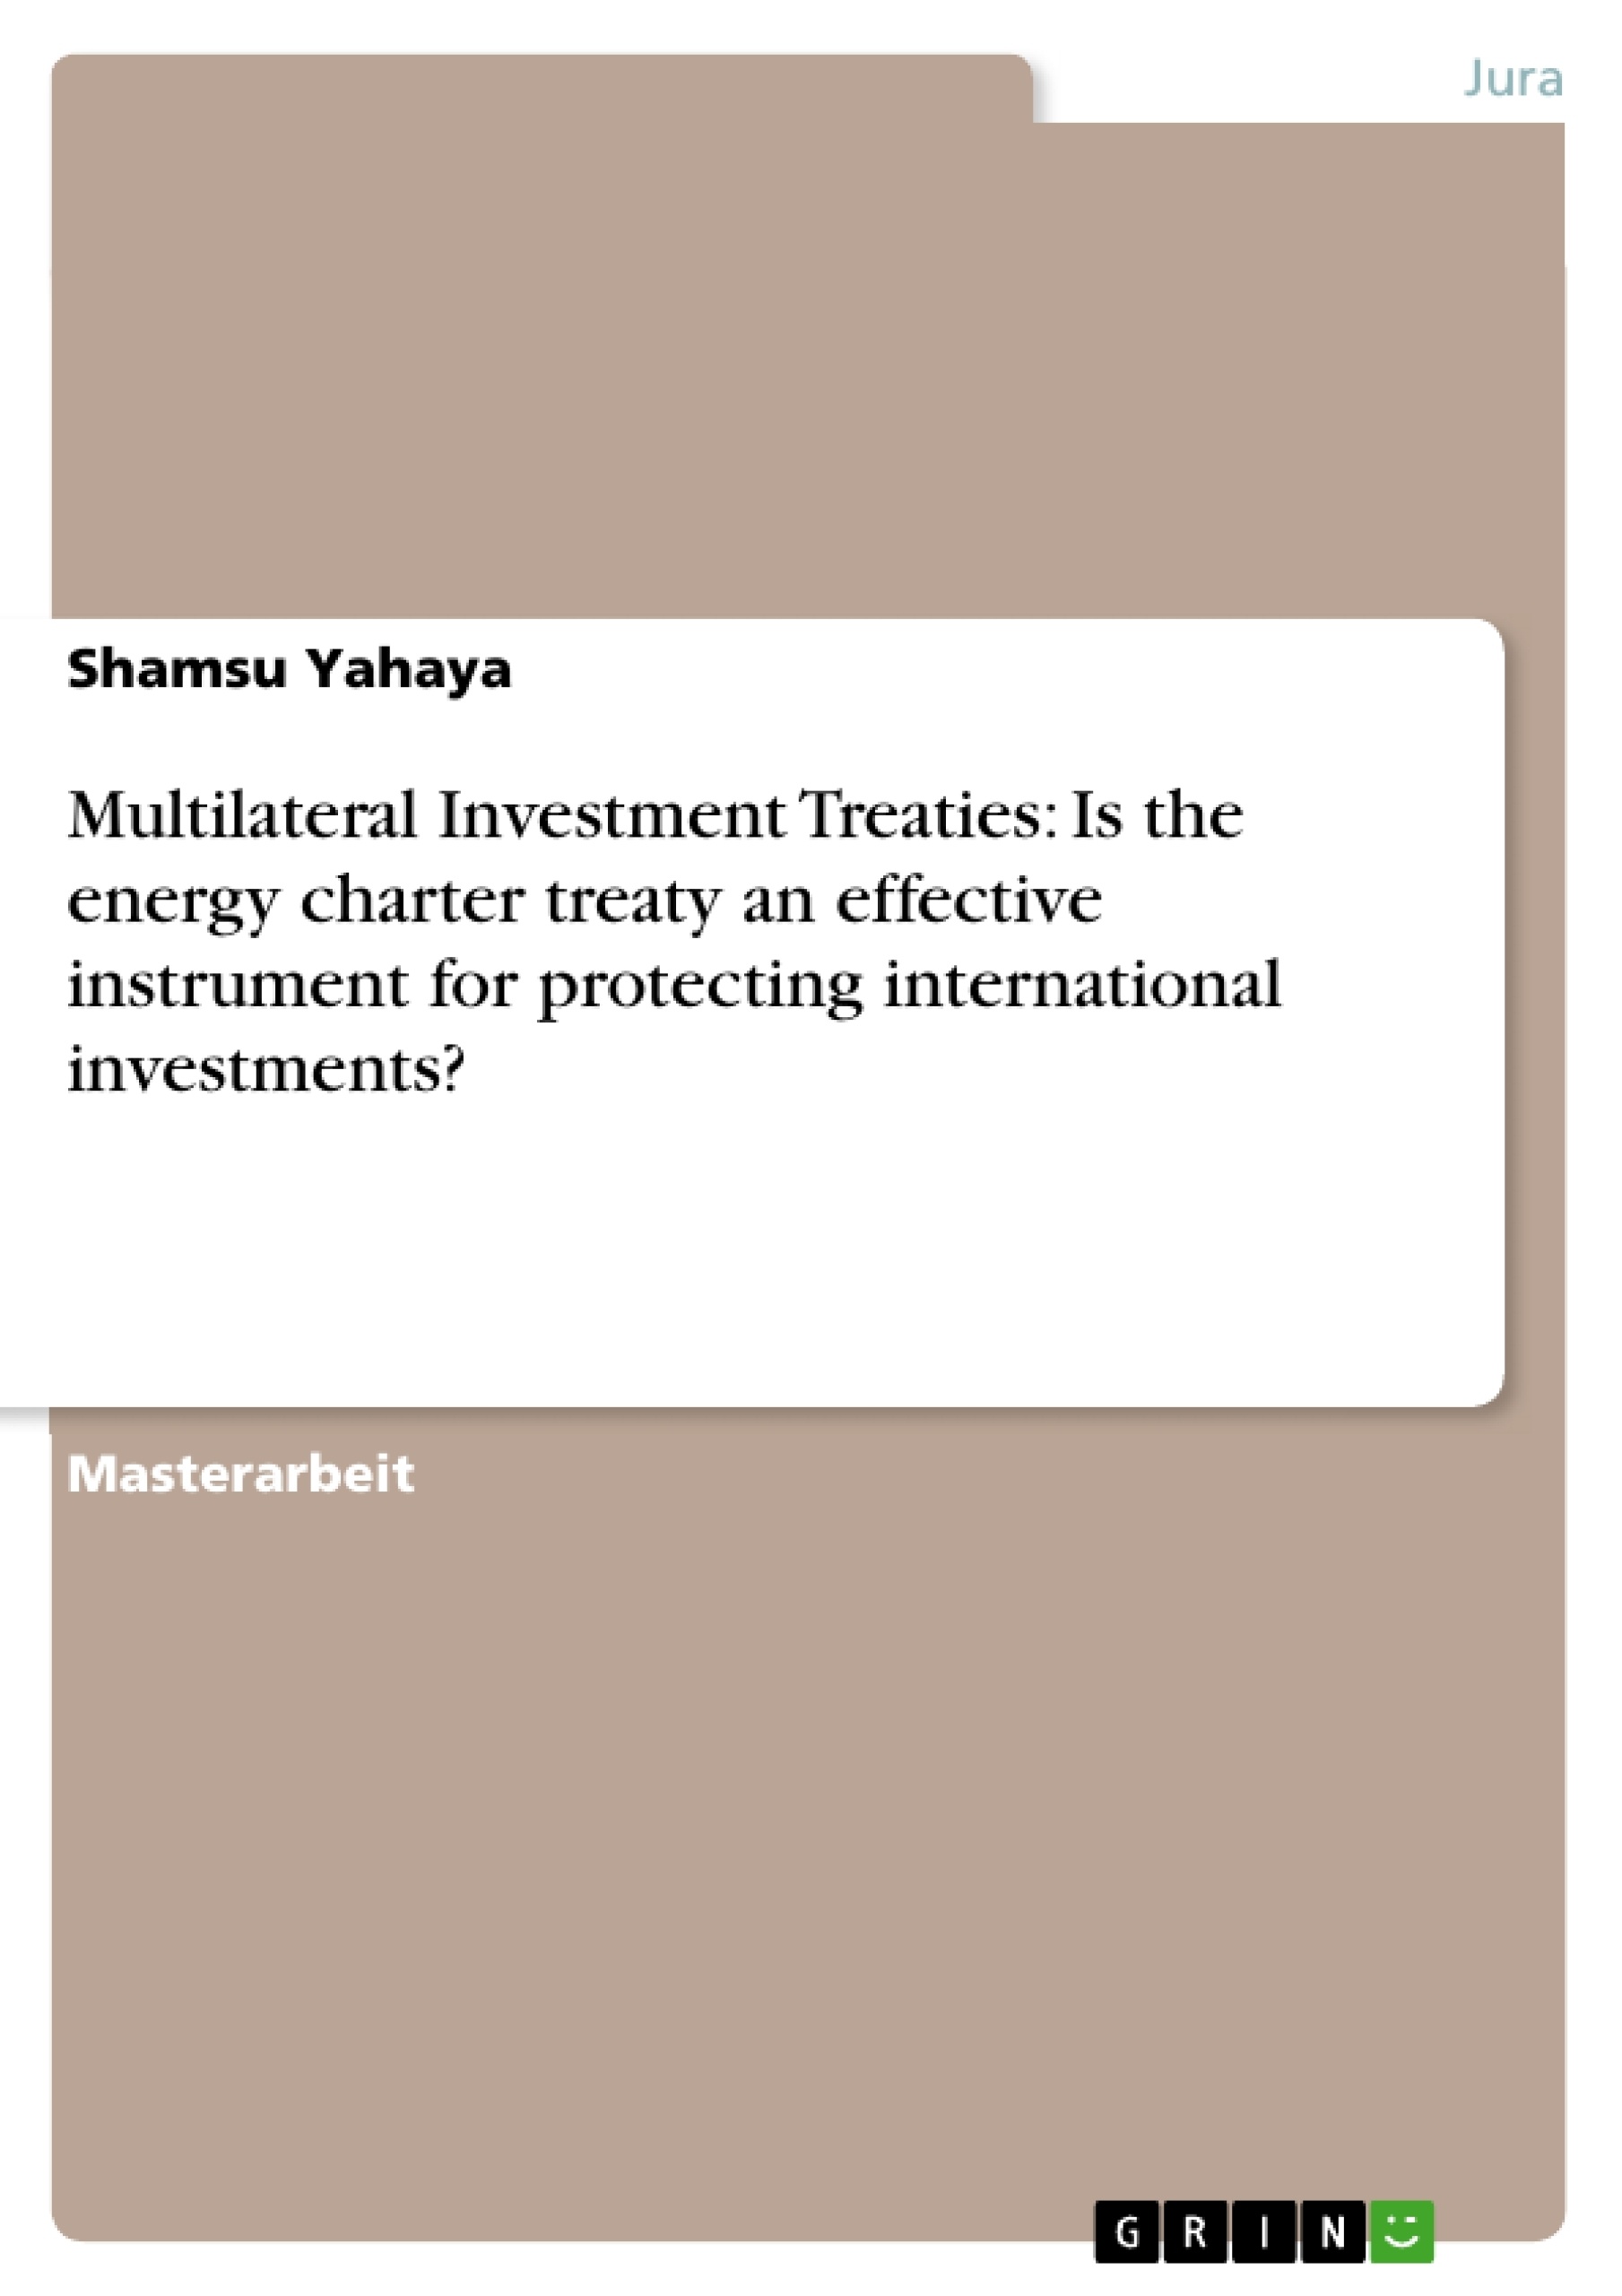 Titel: Multilateral Investment Treaties: Is the energy charter treaty an effective instrument for protecting international investments?